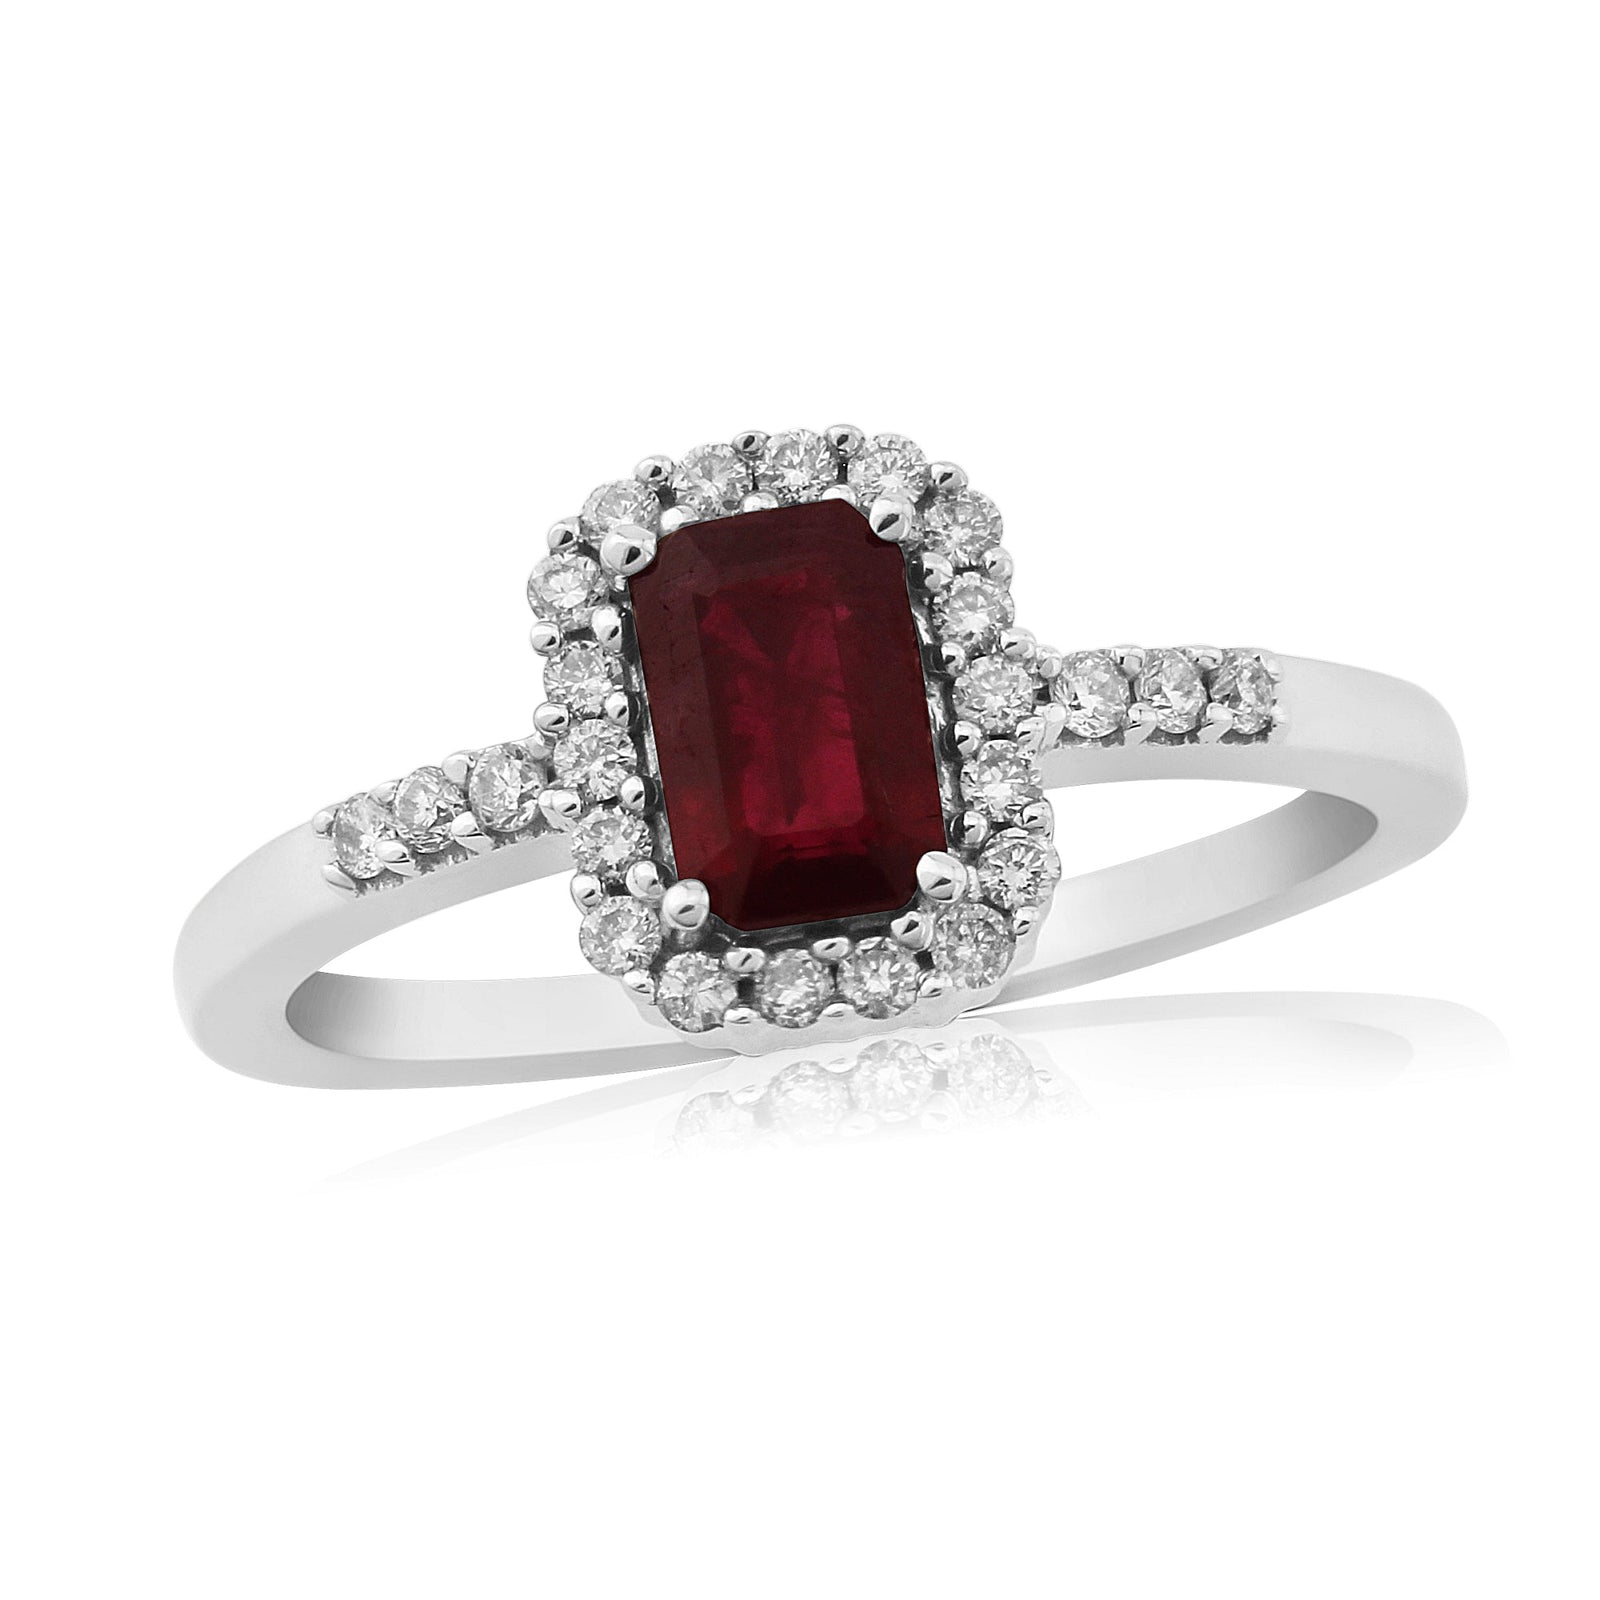 9ct gold 6x4mm octagon cut ruby & diamond cluster ring 0.19ct